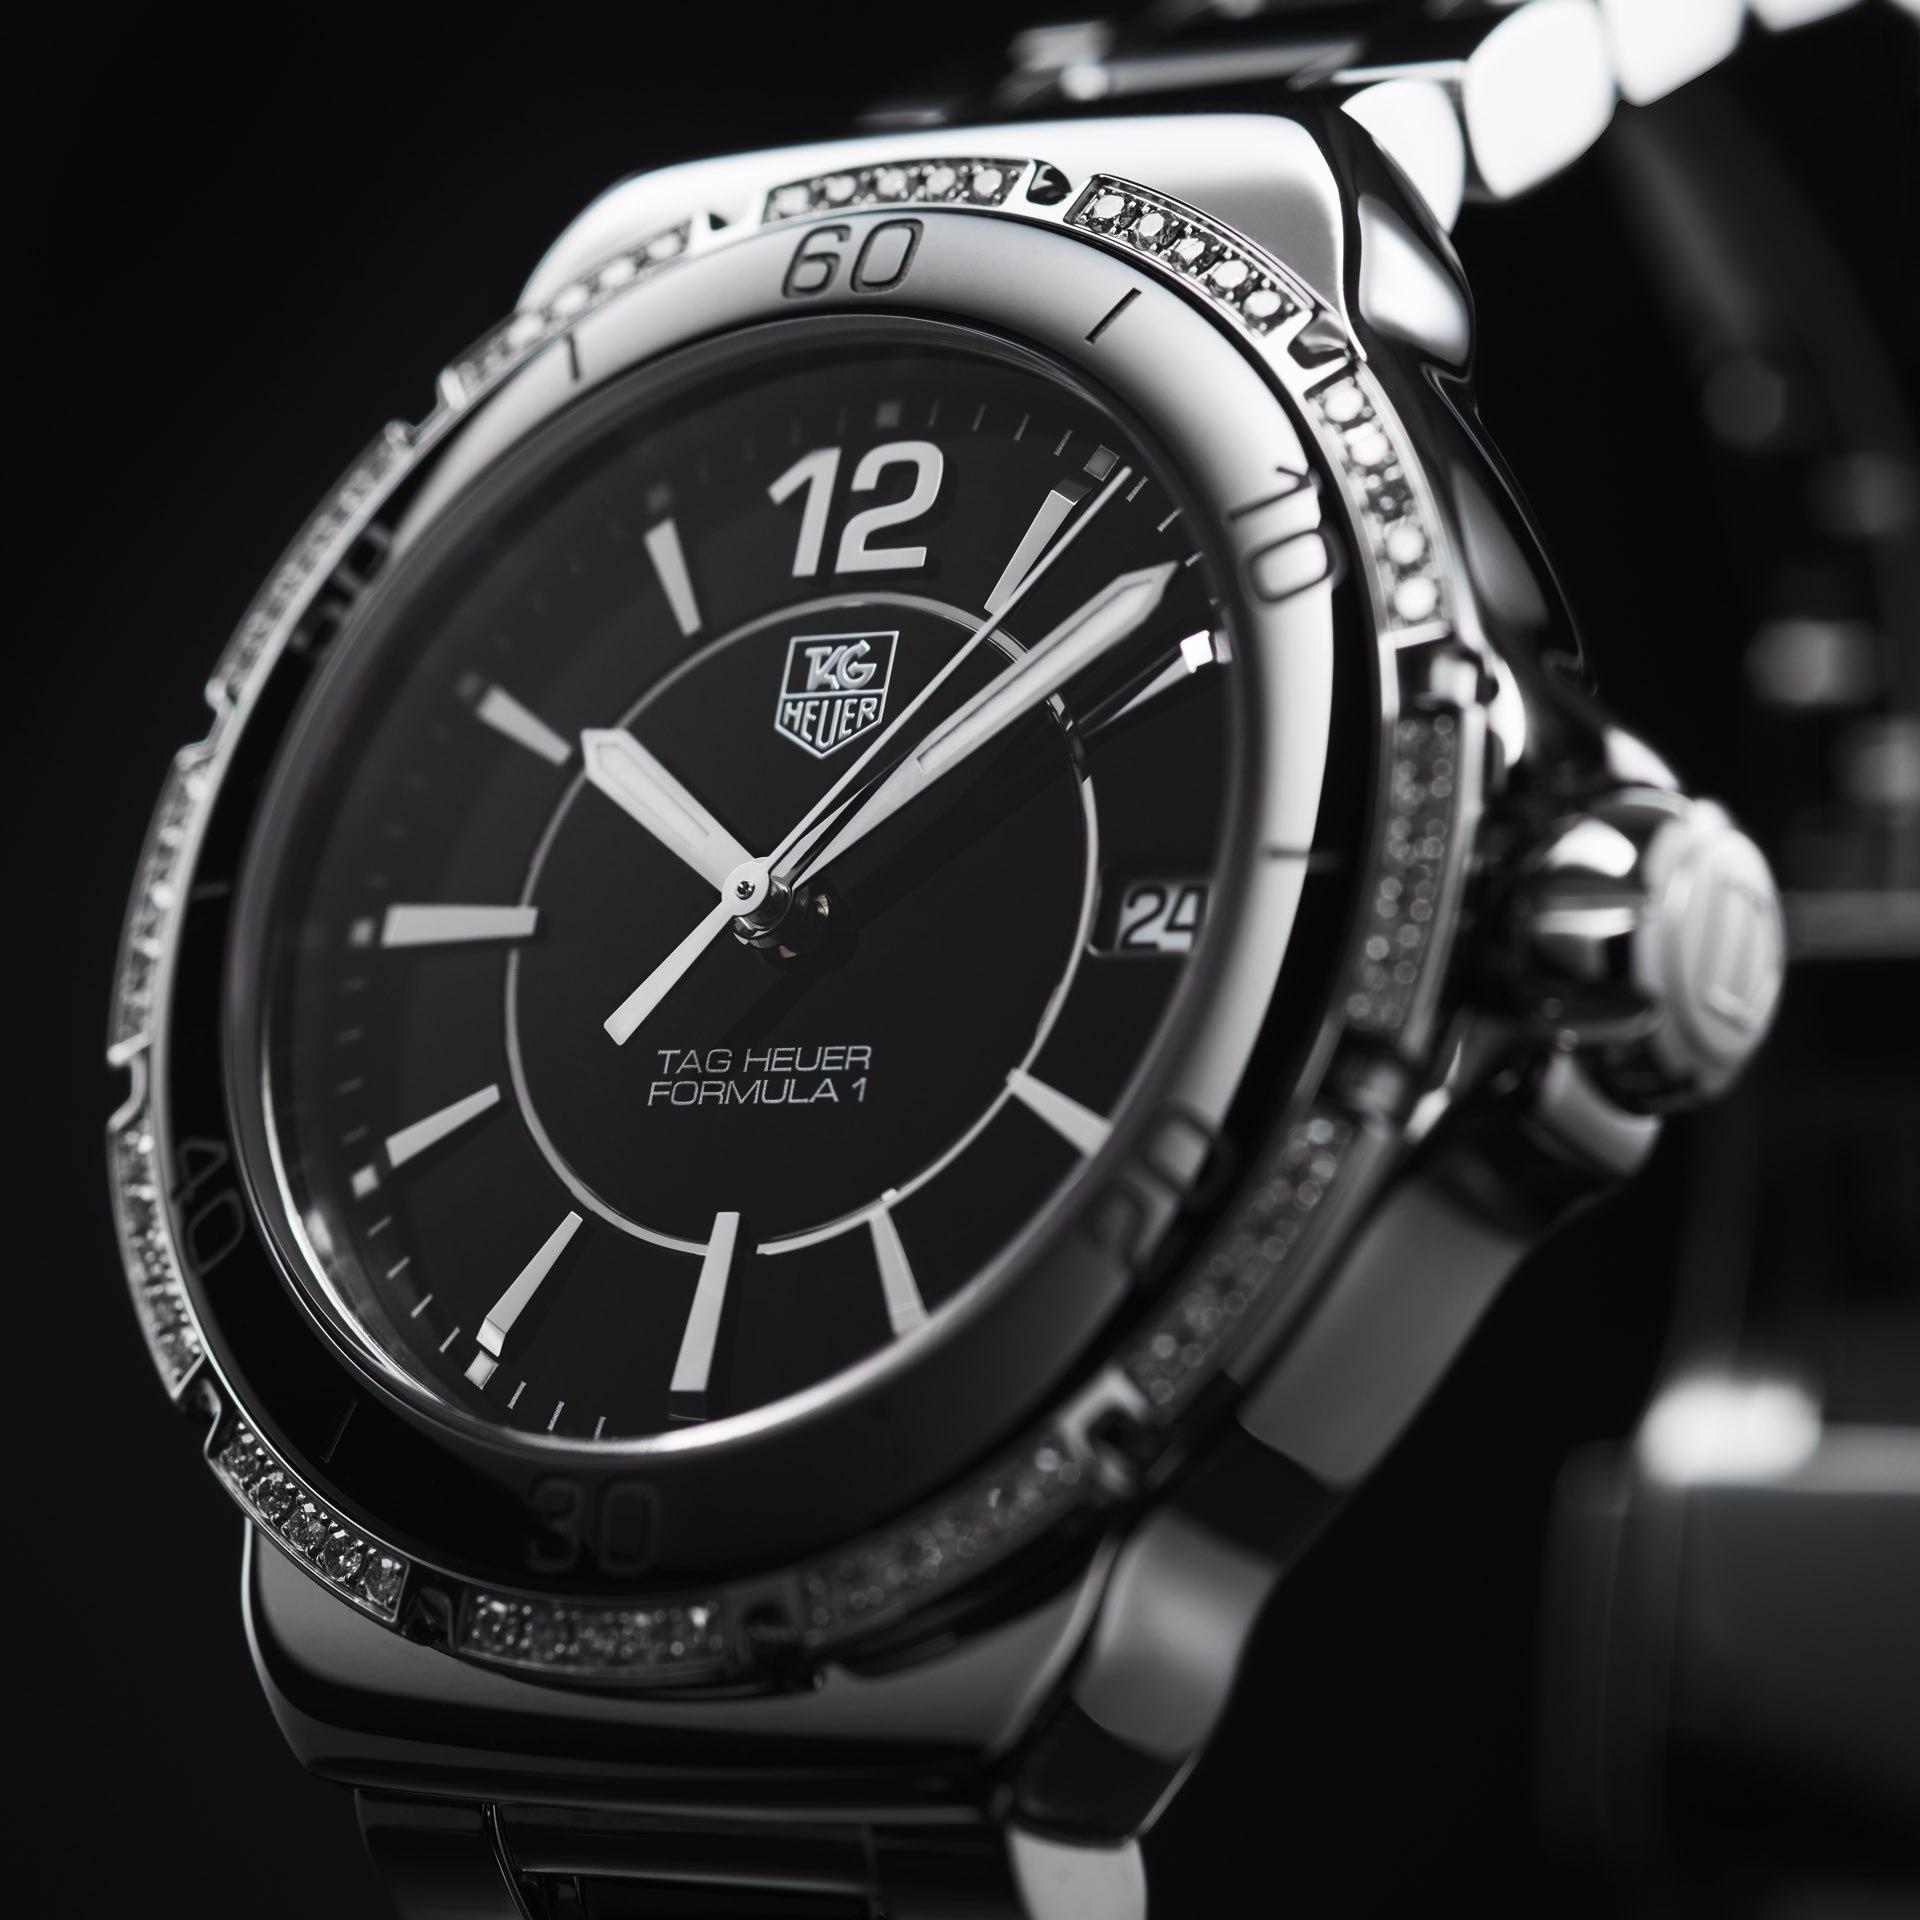 Download TAG Heuer Watch Wallpaper For iPhone & iPad